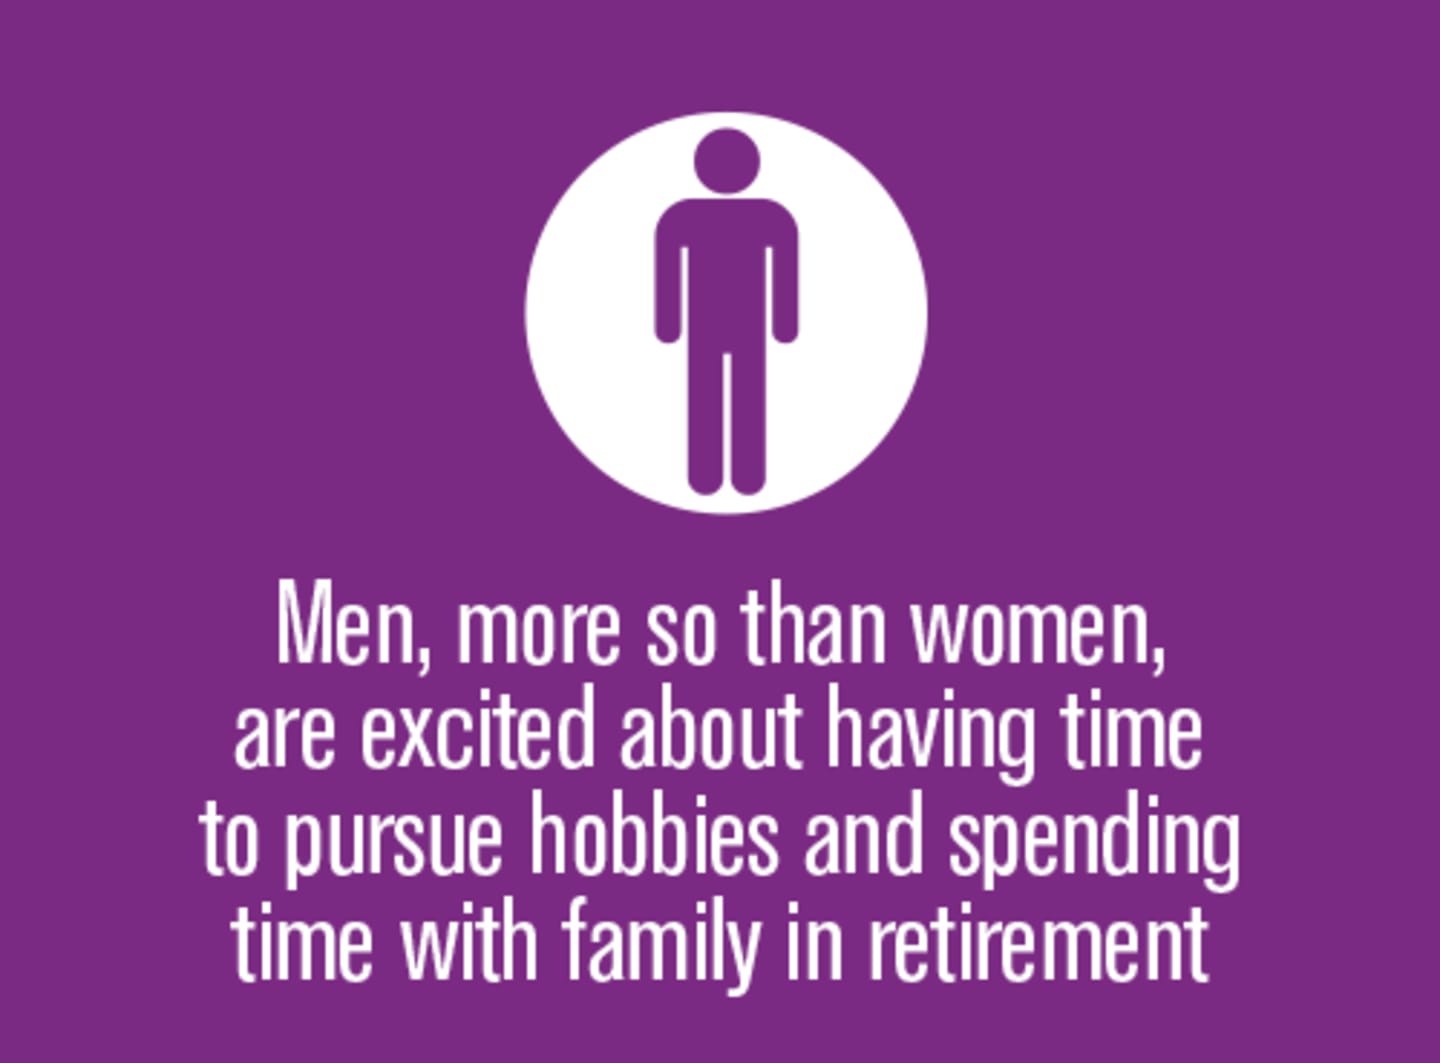 Men, more so than women, are excited to have time to pursue hobbies.